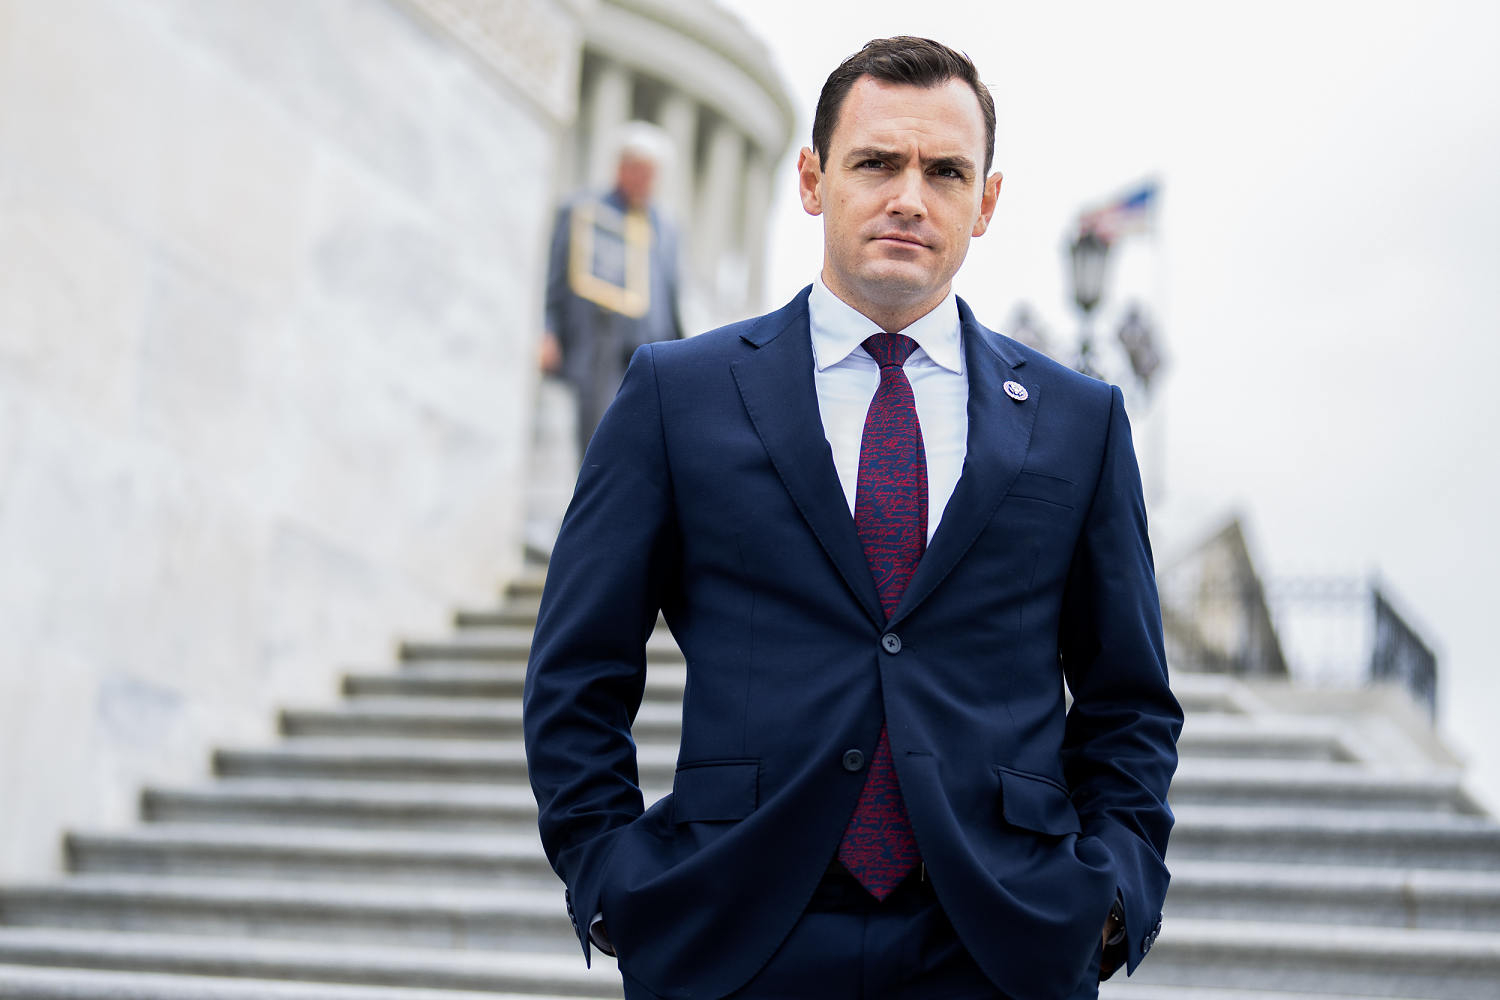 Wisconsin GOP Rep. Mike Gallagher won’t run for re-election